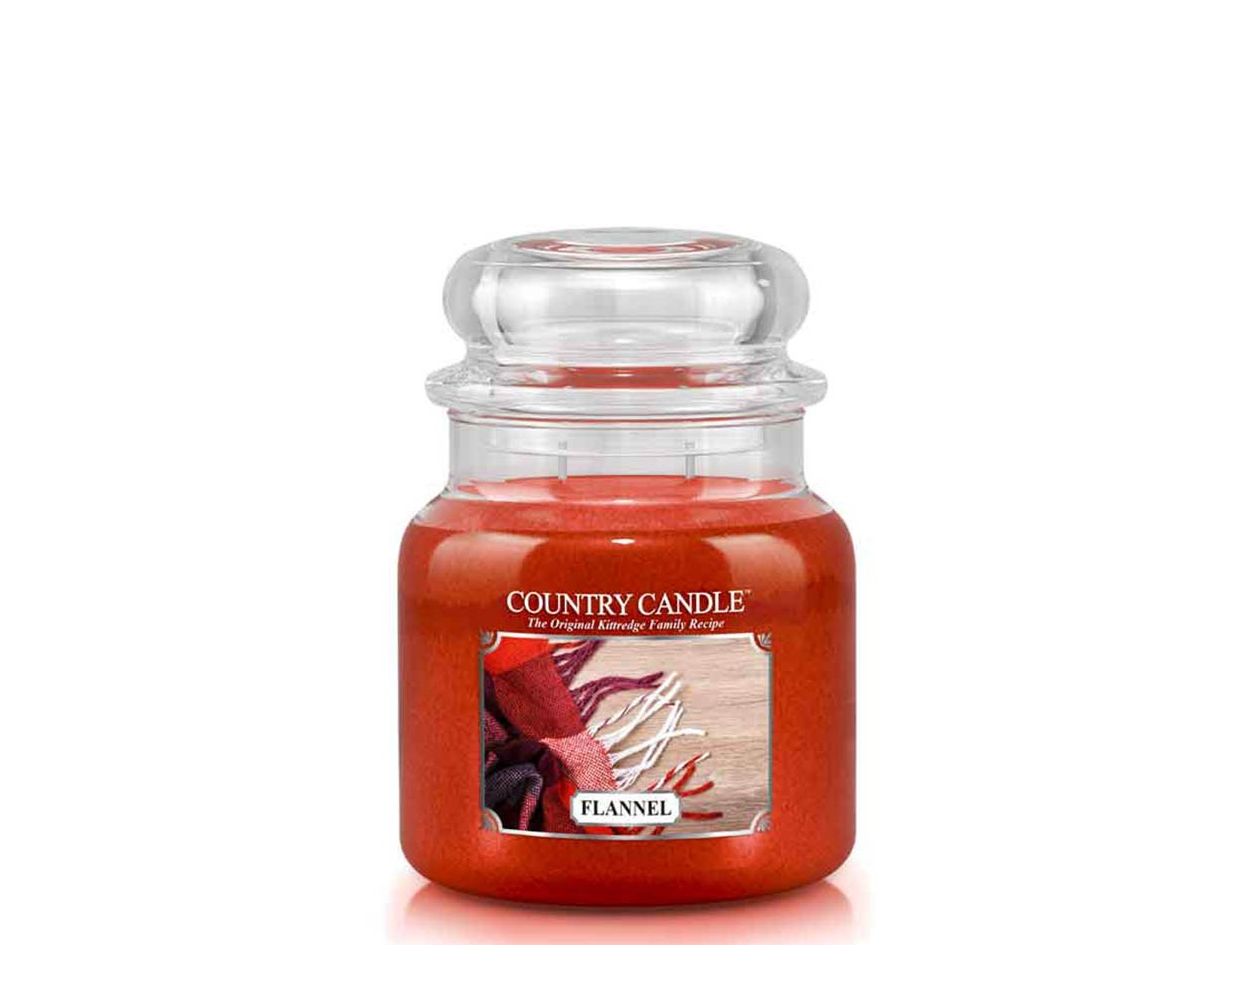 Country Candle Medium Jar Flannel